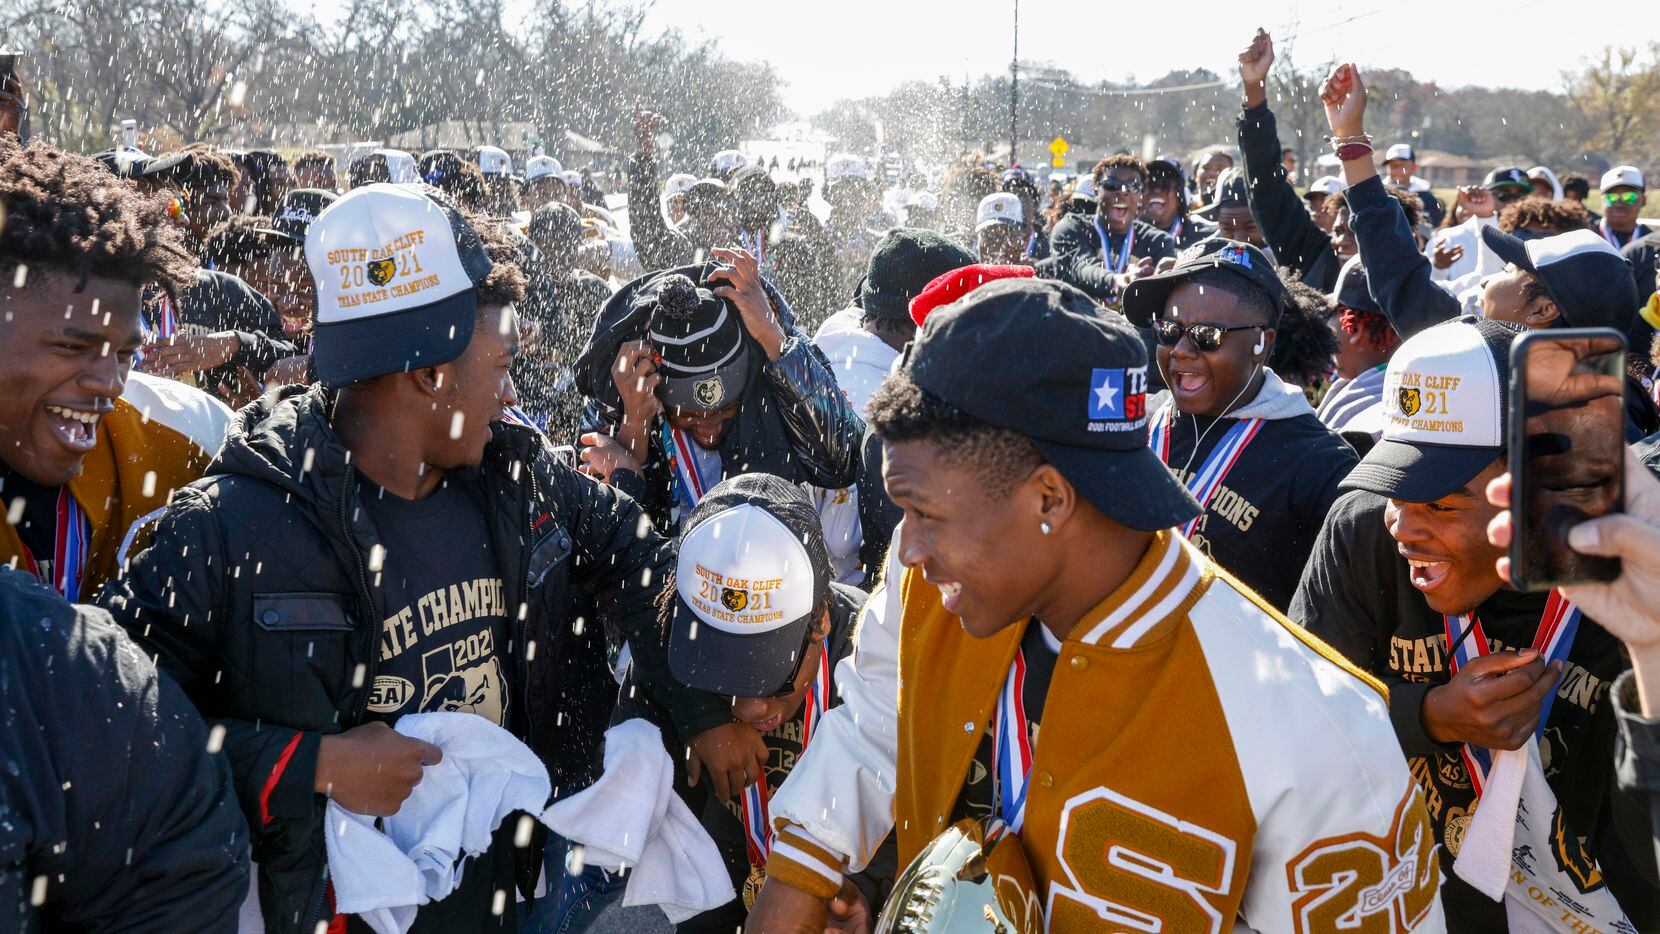 Water is sprayed as members of the South Oak Cliff team celebrate during a parade...